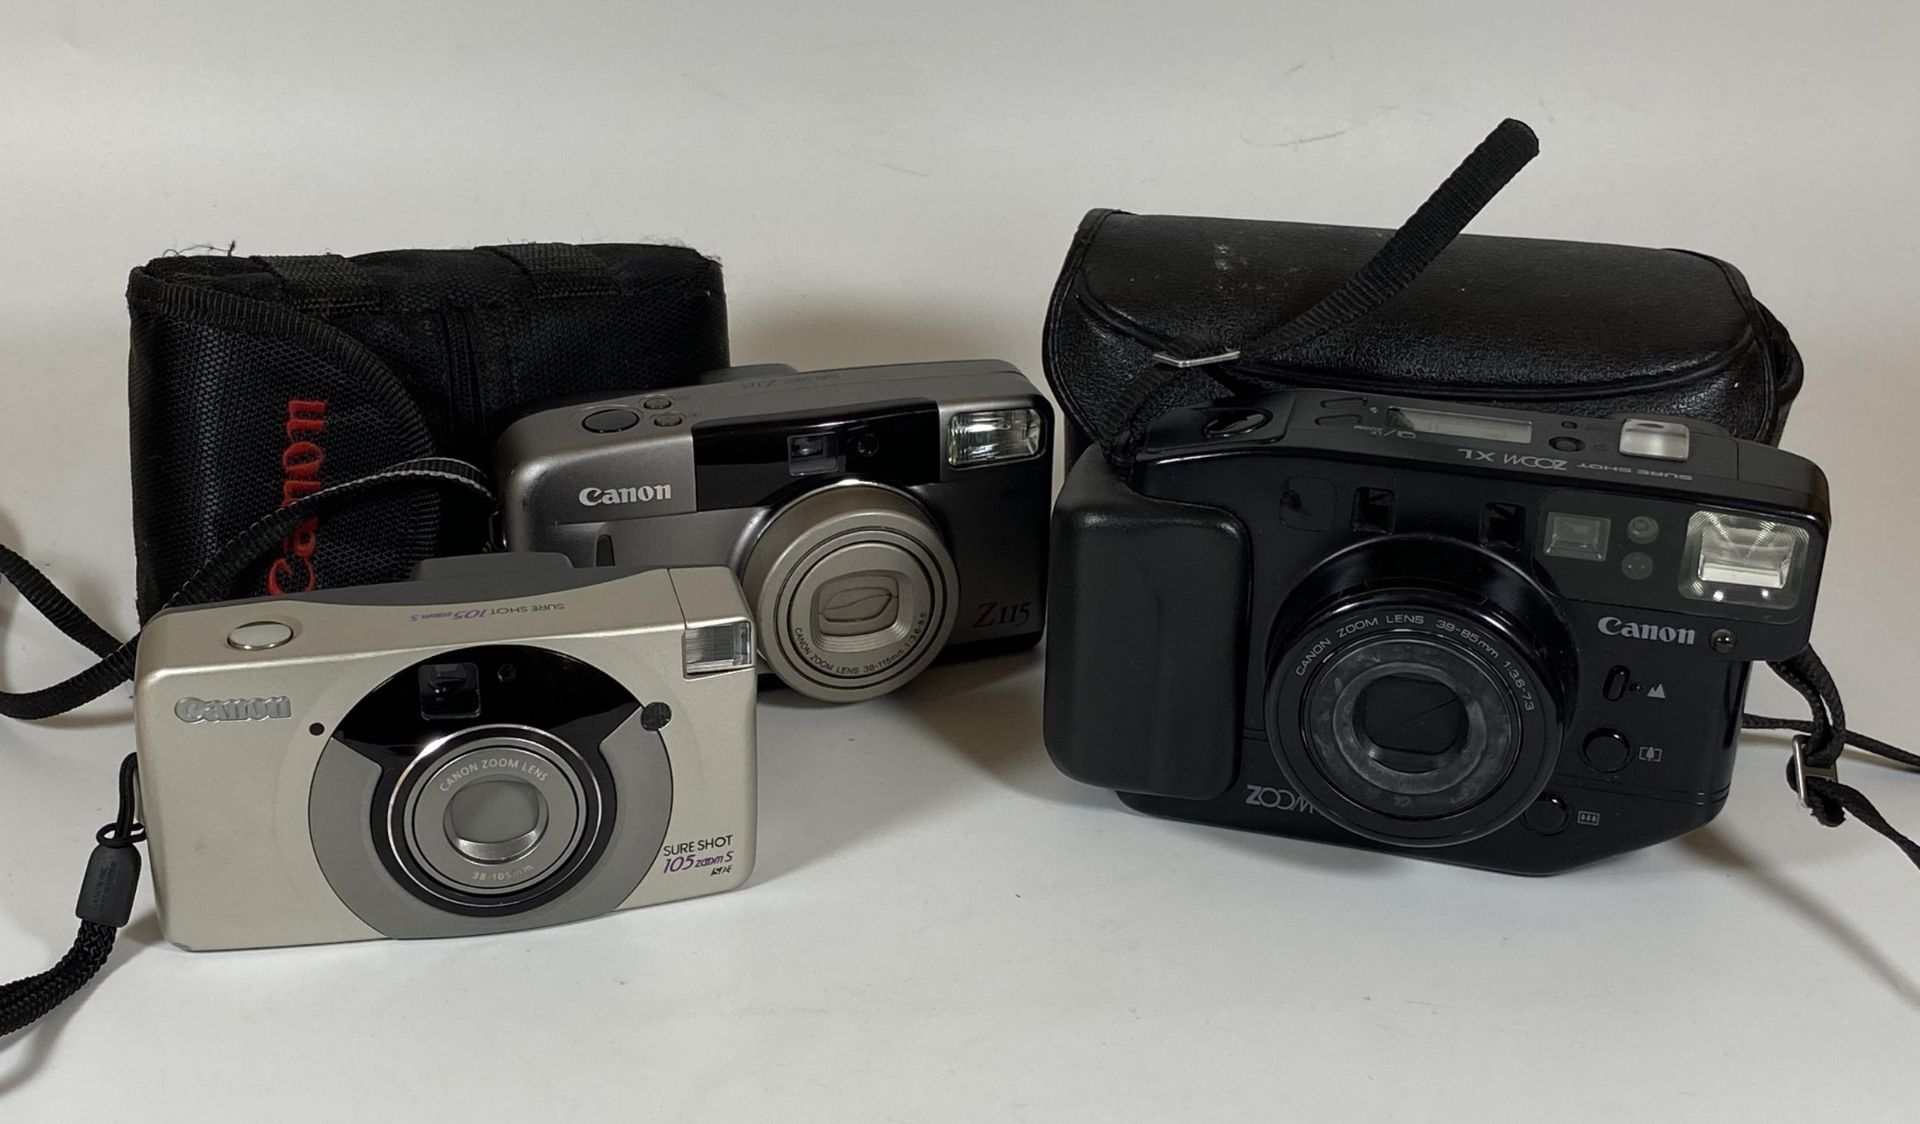 THREE CANON CAMERAS - CANON SURE SHOT 105 ZOOM S WITH 105MM LENS, CANON Z115 WITH 115MM LENS AND A